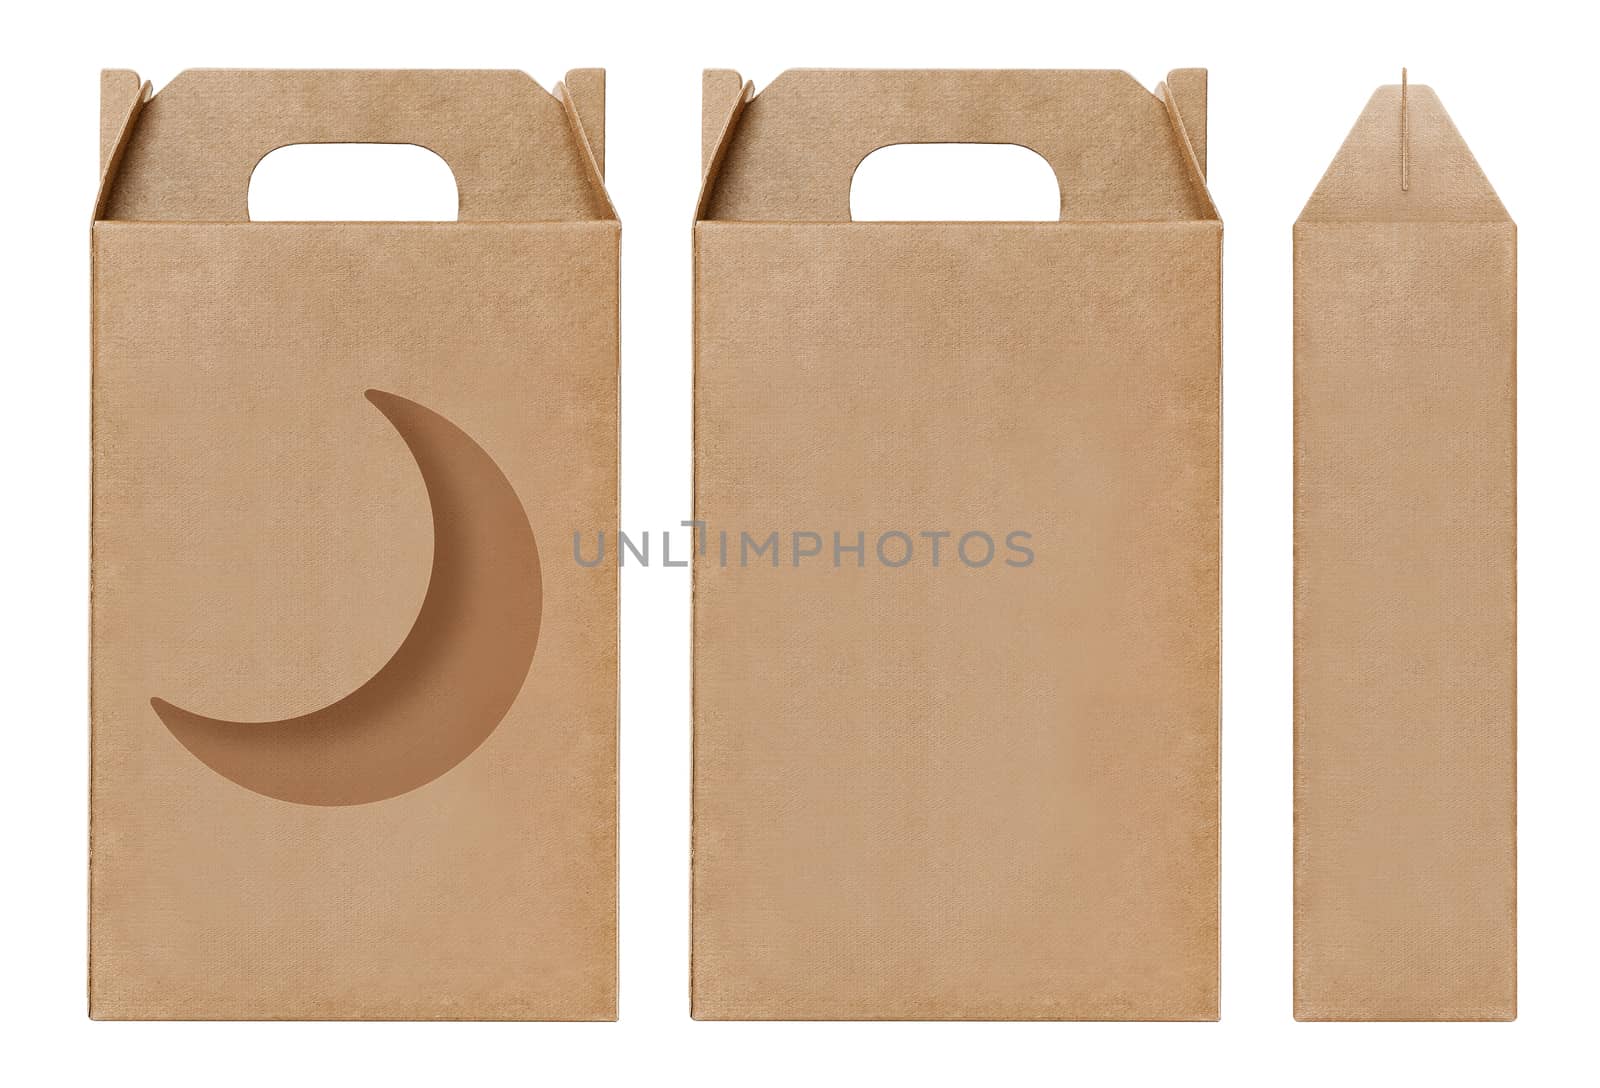 Box brown window Crescent Moon shape cut out Packaging template, Empty kraft Box Cardboard isolated white background, Boxes Paper kraft natural material, Gift Box Brown Paper from Industrial Packaging carton by cgdeaw